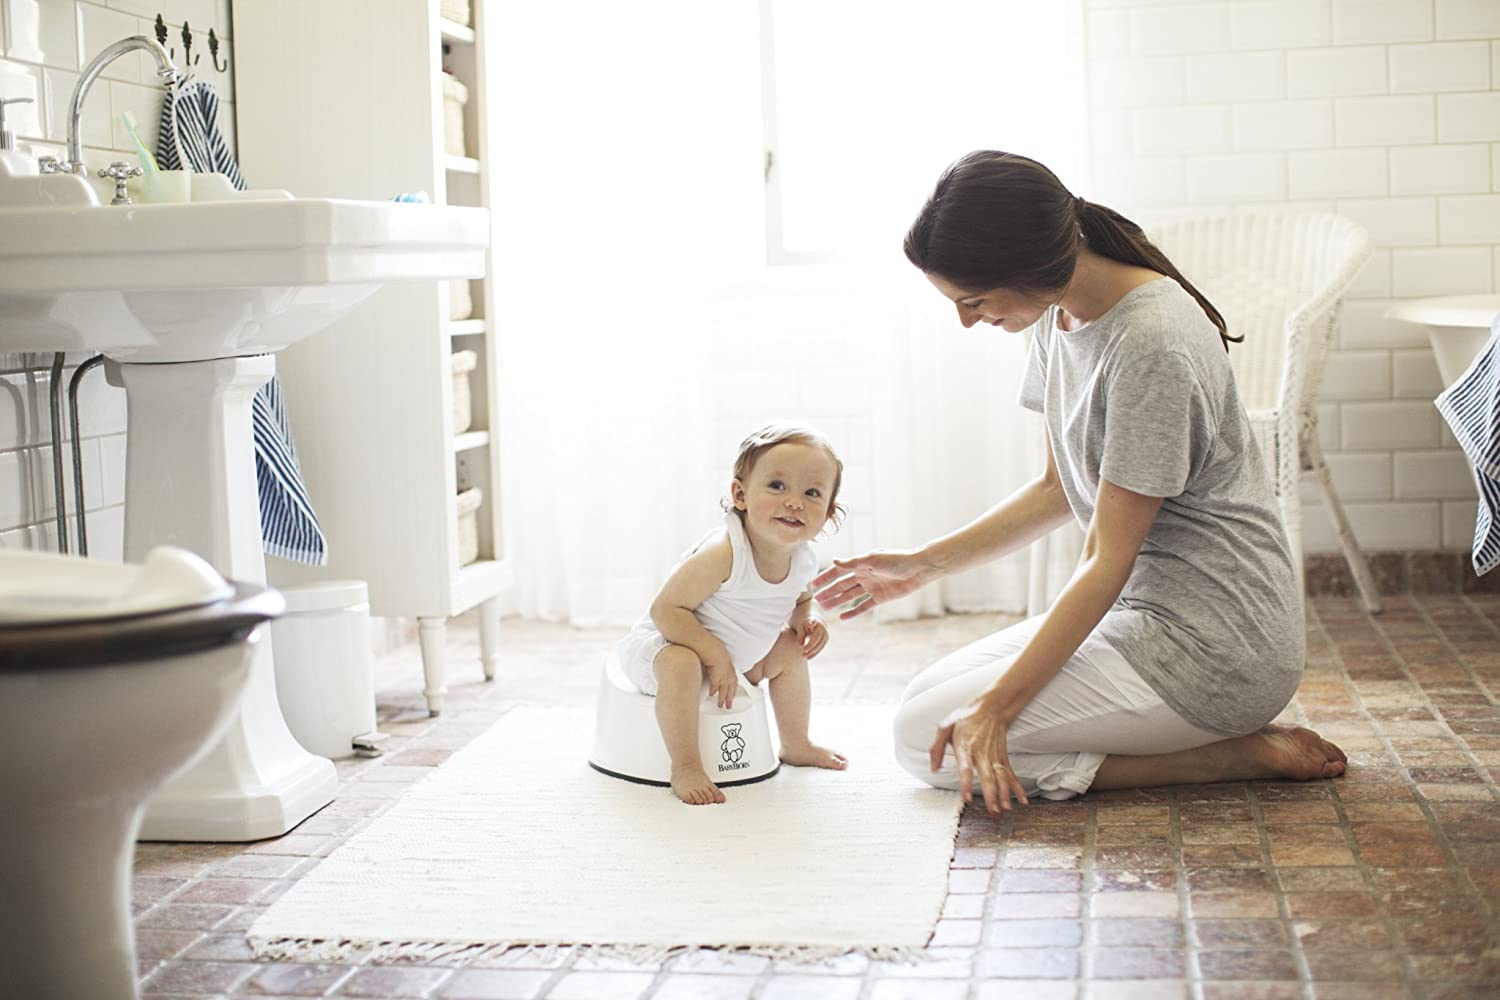 The Toddler Dilemma: Potty Seat or Potty Chair?